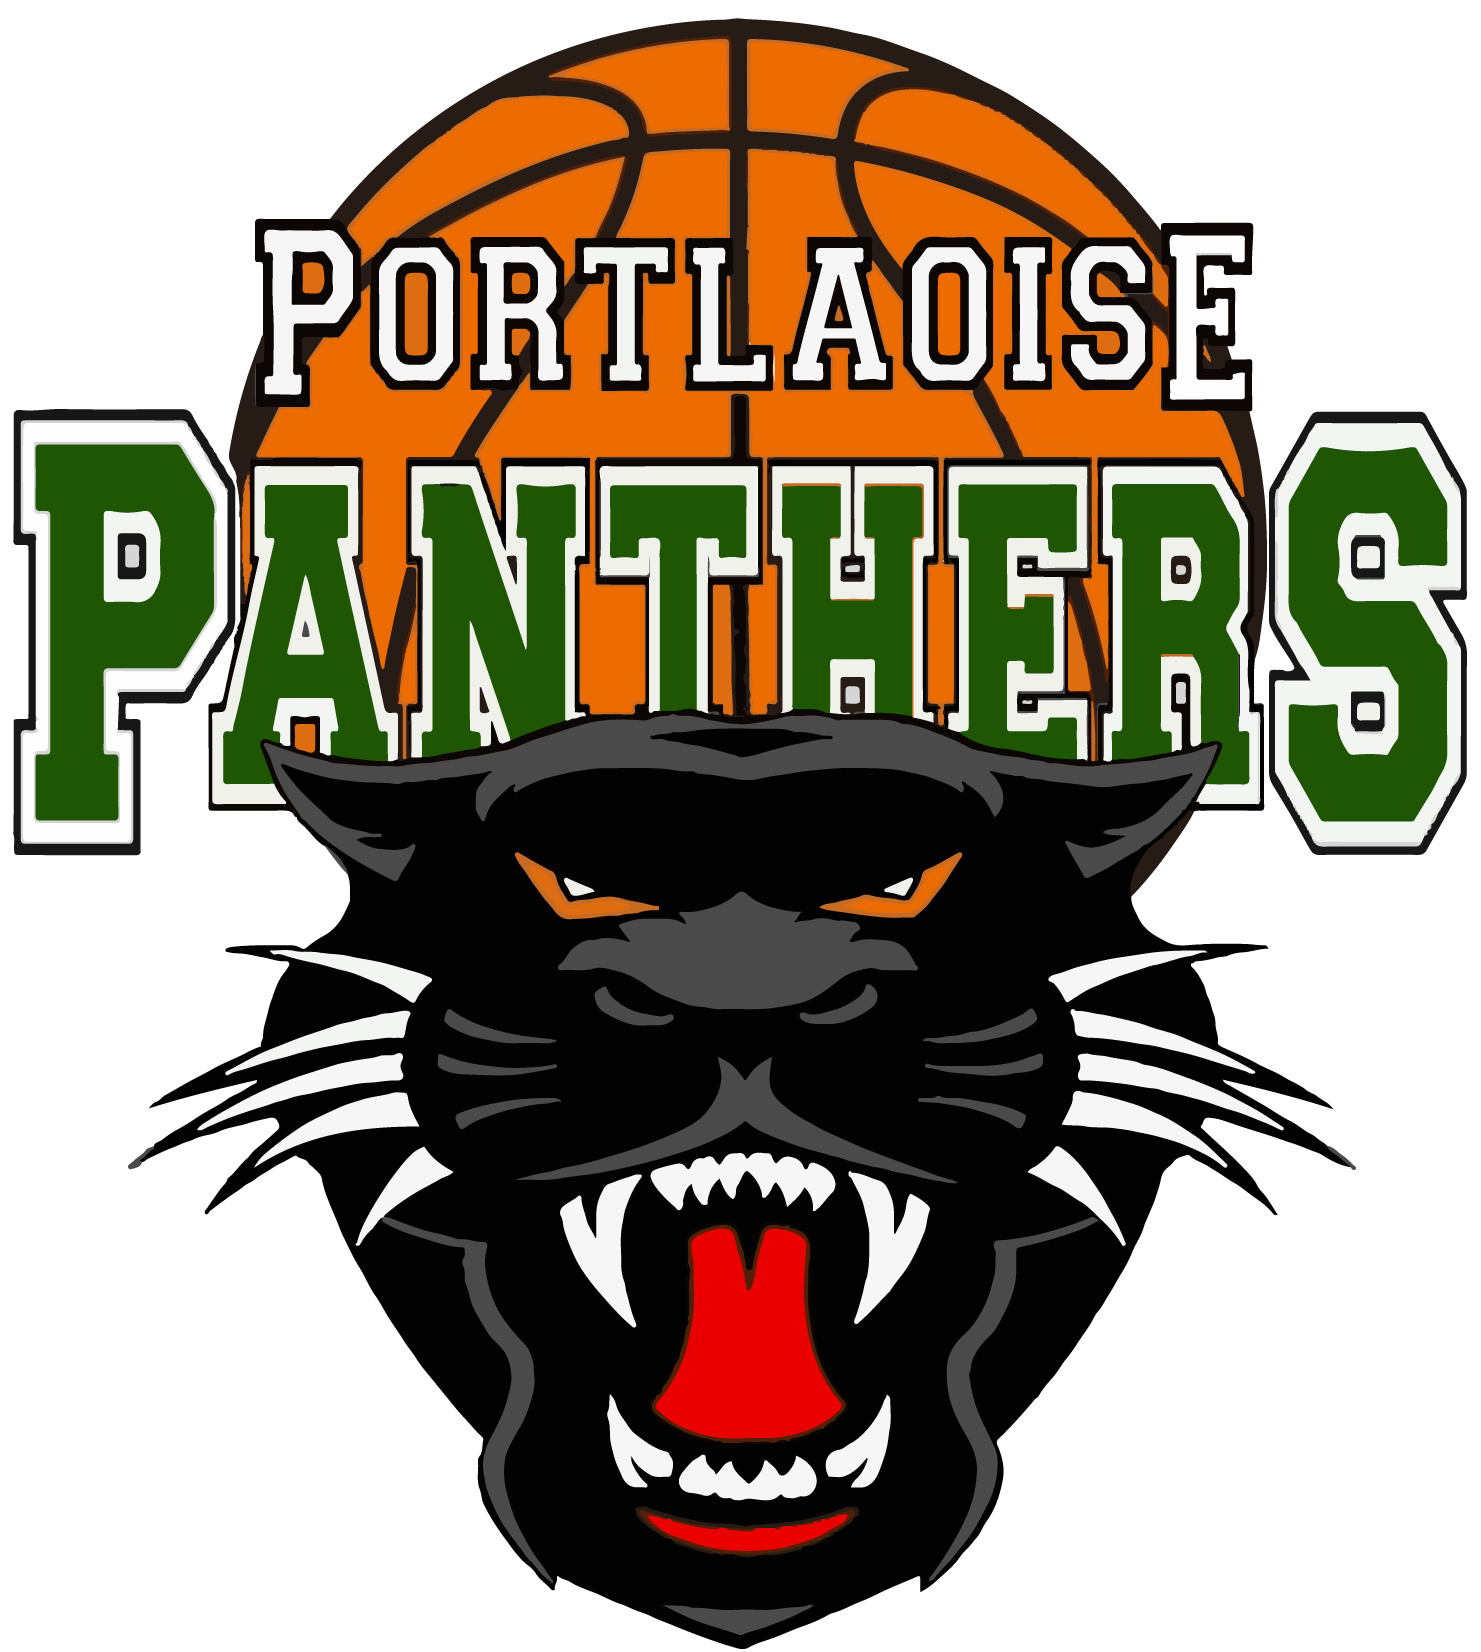 Portlaoise Panthers Basketball Club